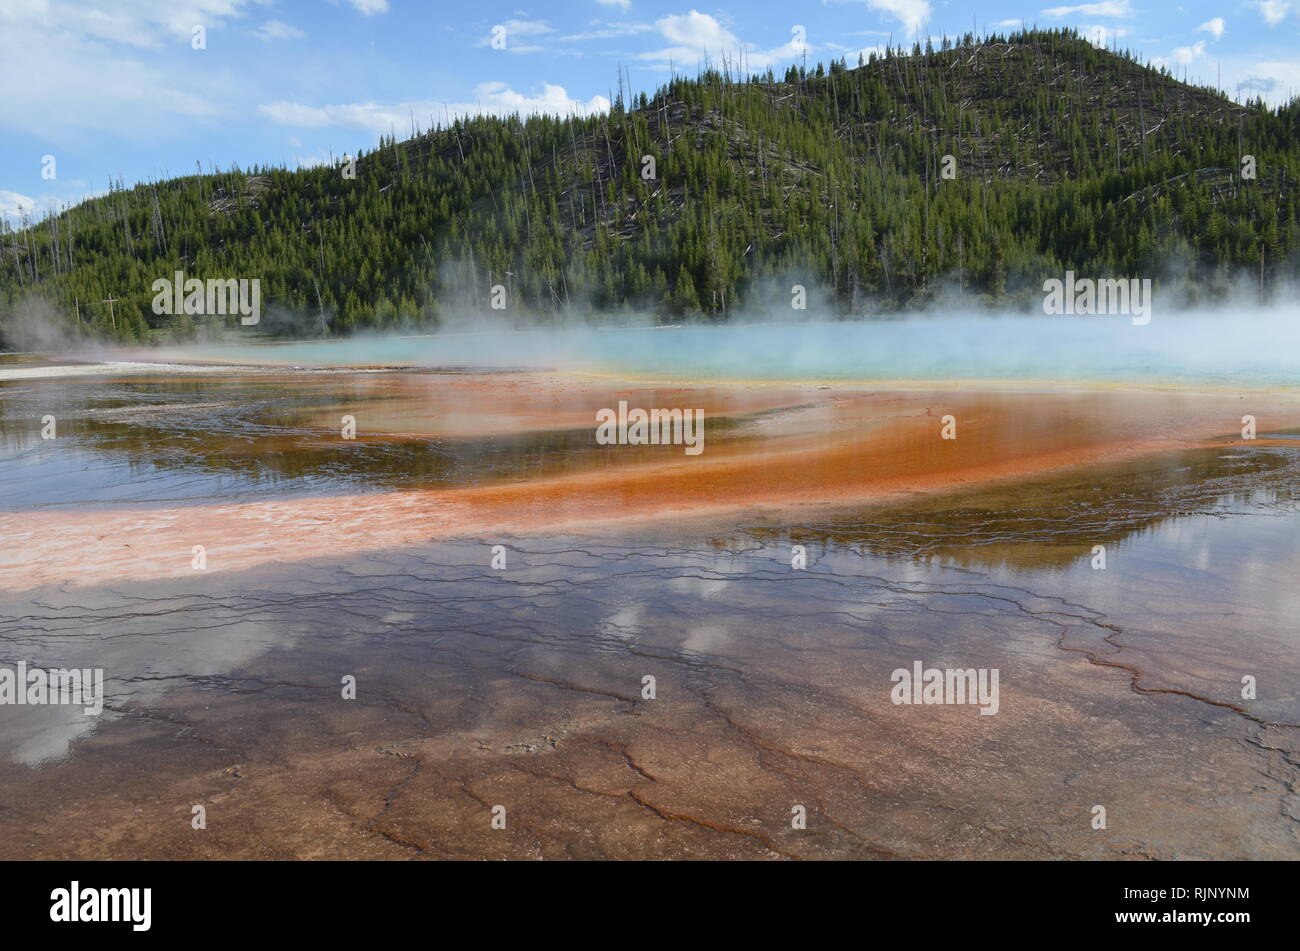 Mineral deposition and algal mats in a hot spring, with green hill in the background, at Yellowstone National Park Wyoming USA Stock Photo